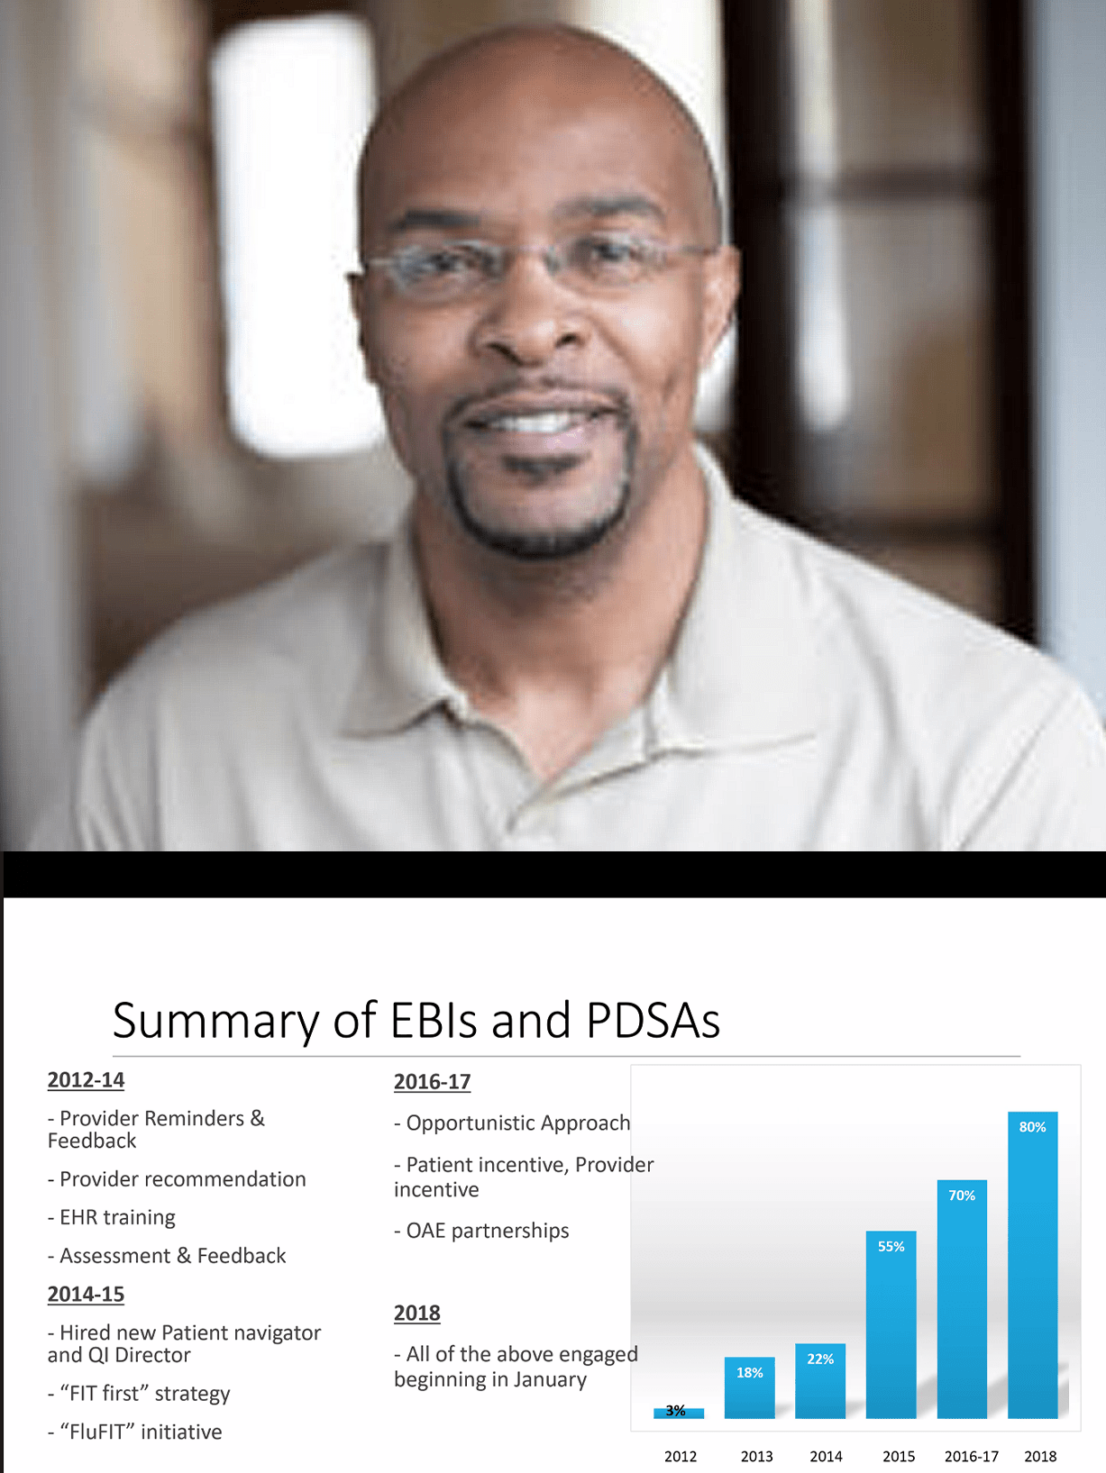 Summary of EBIs and PDSAs including provider reminders & feedback.